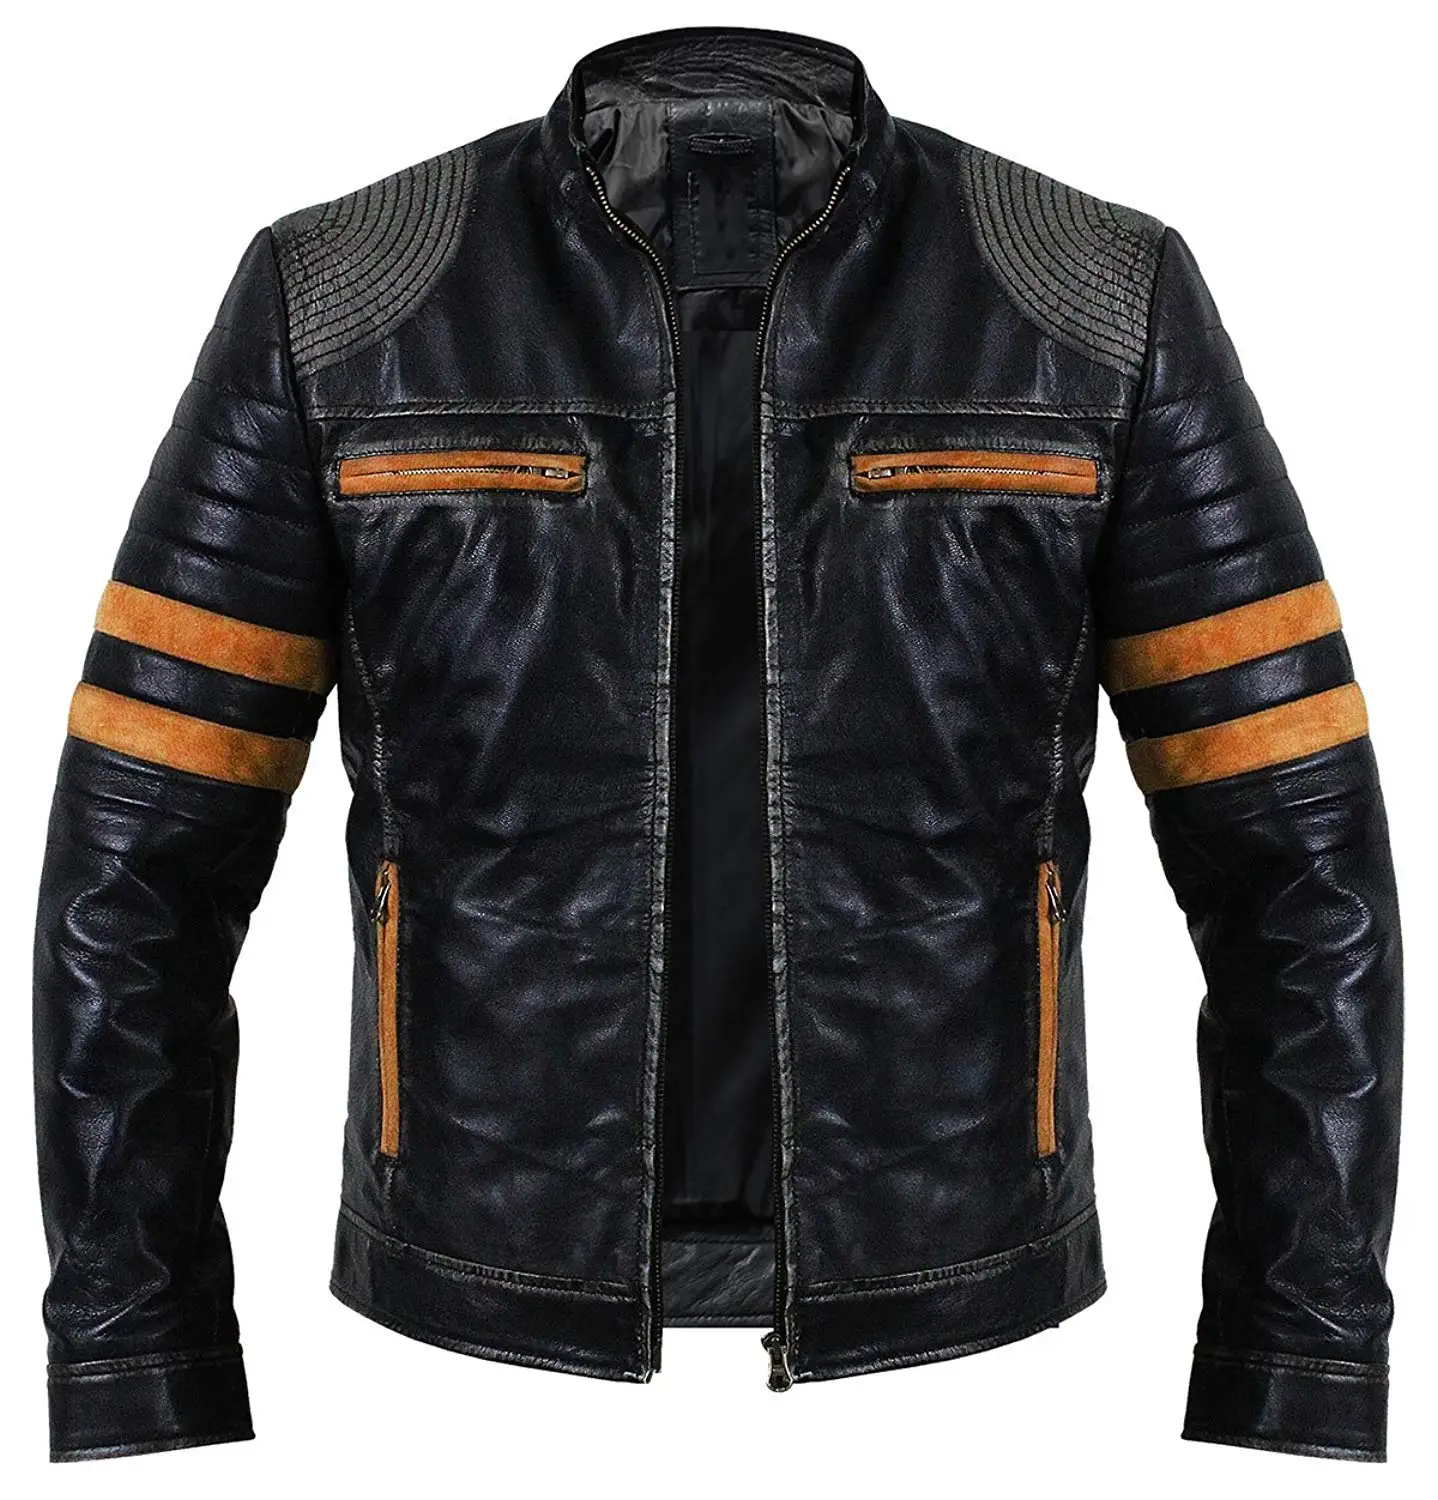 Download Buy Vintage Men Motorcycle Distressed Black Biker Quilted Cafe Racer Retro Orange Striped Leather Jacket In Cheap Price On Alibaba Com